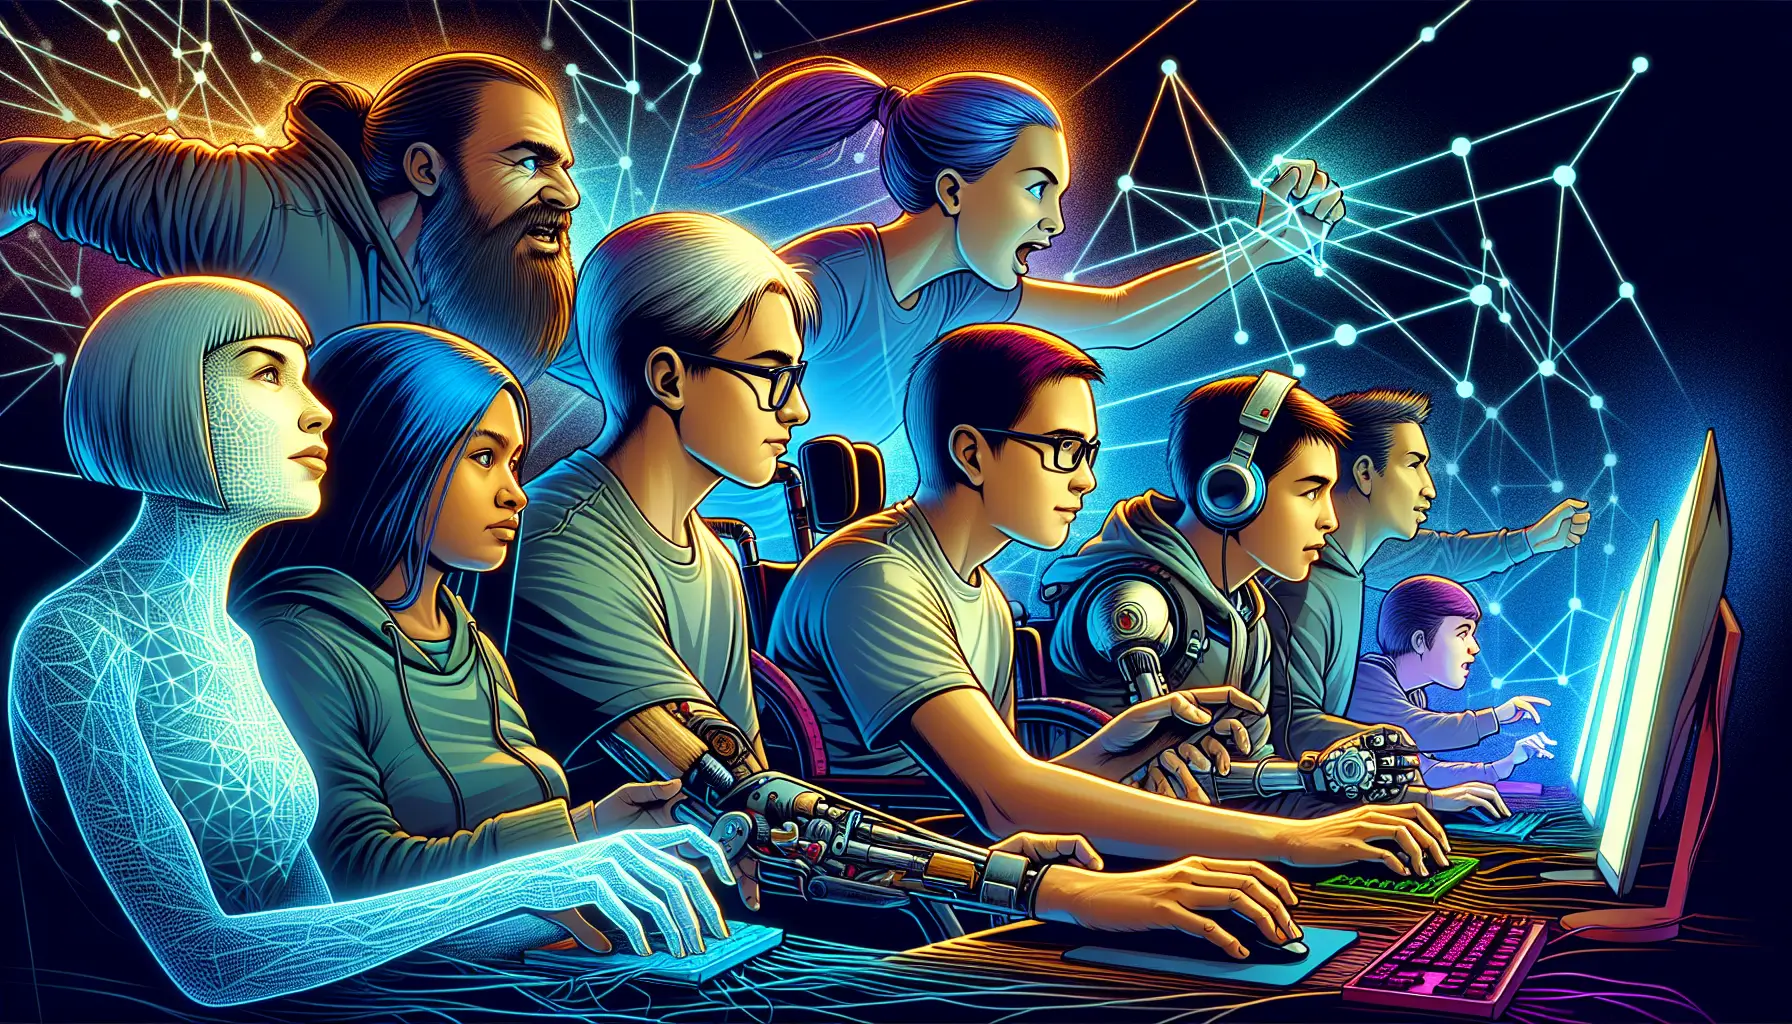 Illustration of gamers playing a web3 game